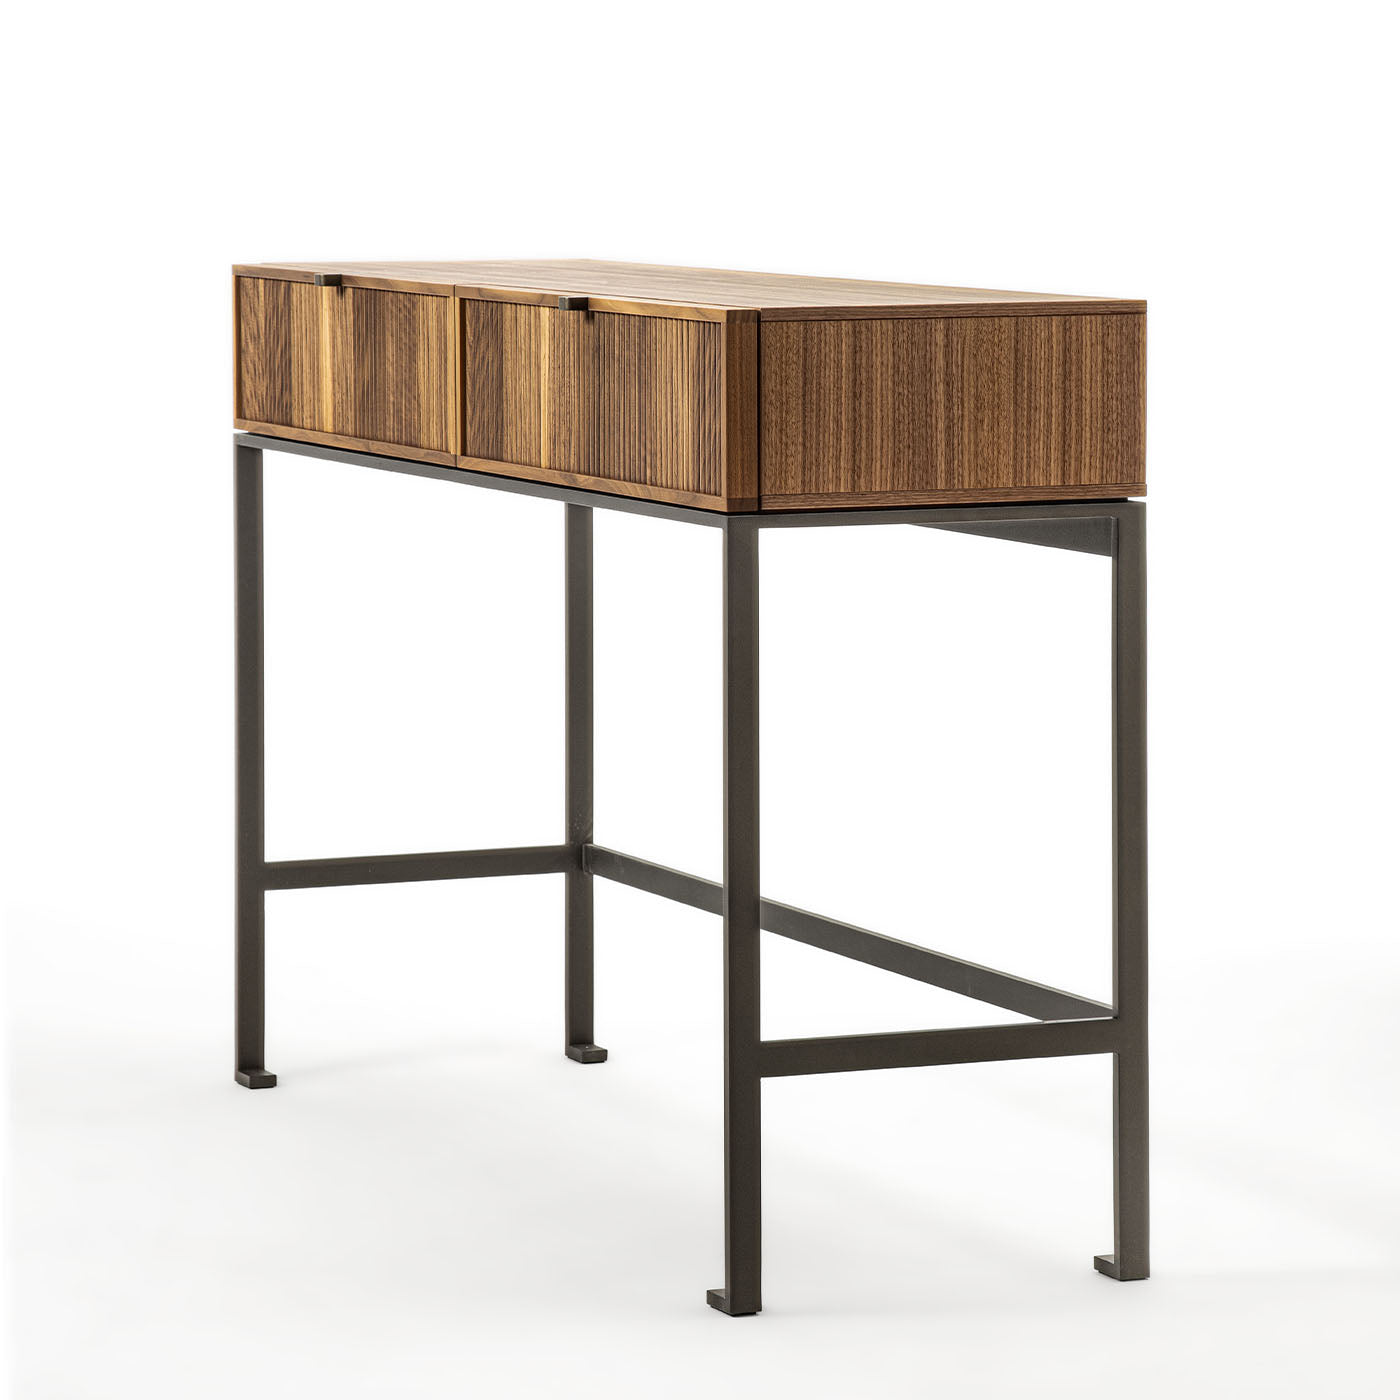 Melody Canaletto Walnut Wood Console Table - Alternative view 1